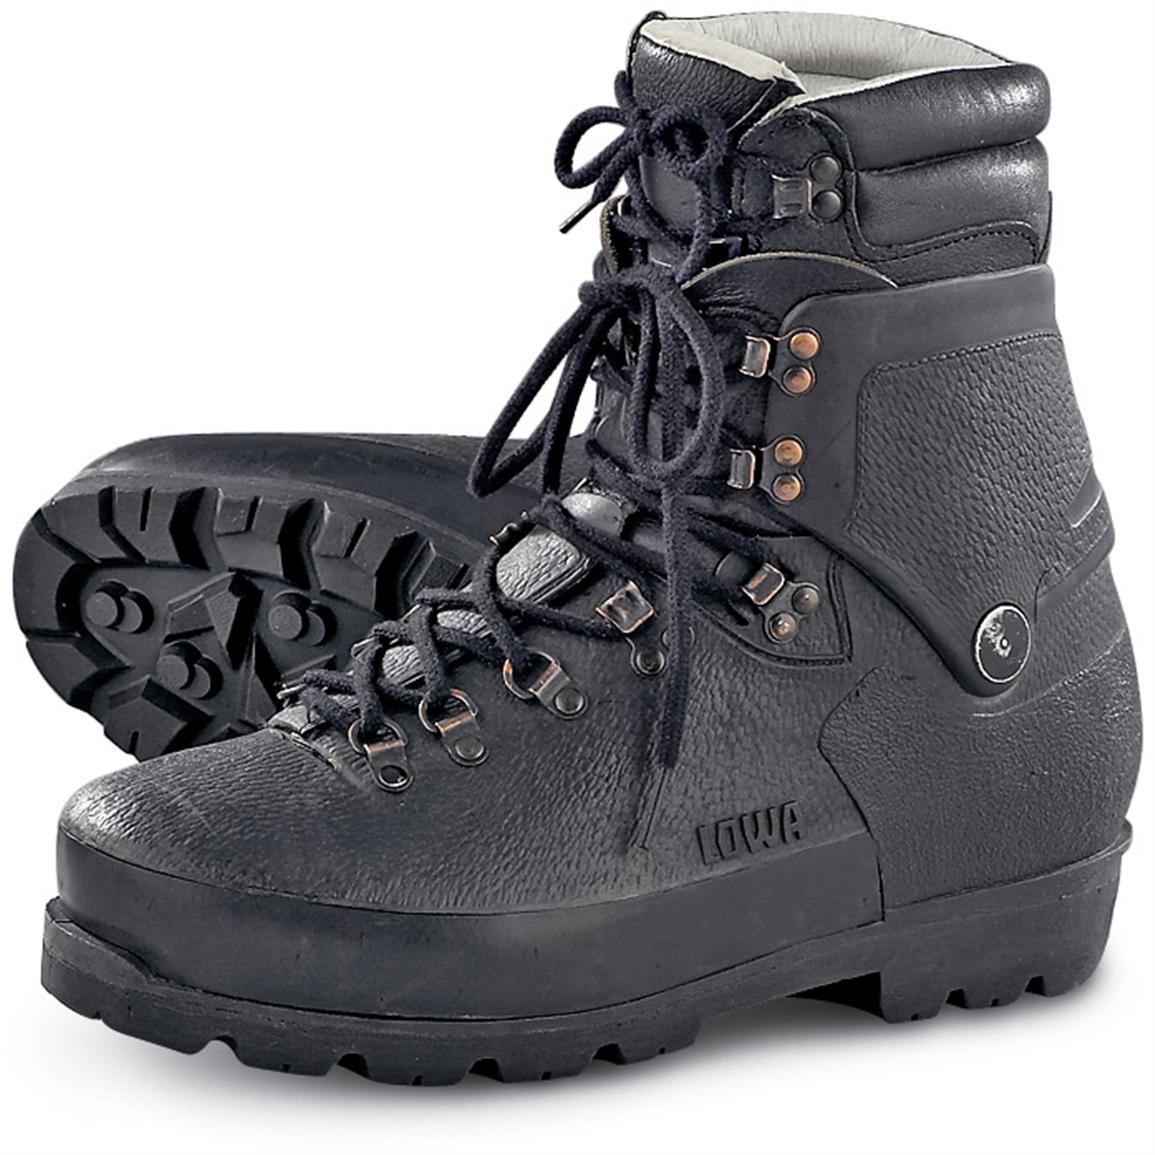 Men's Used German Mountain Boots, Black - 94670, at Sportsman's Guide